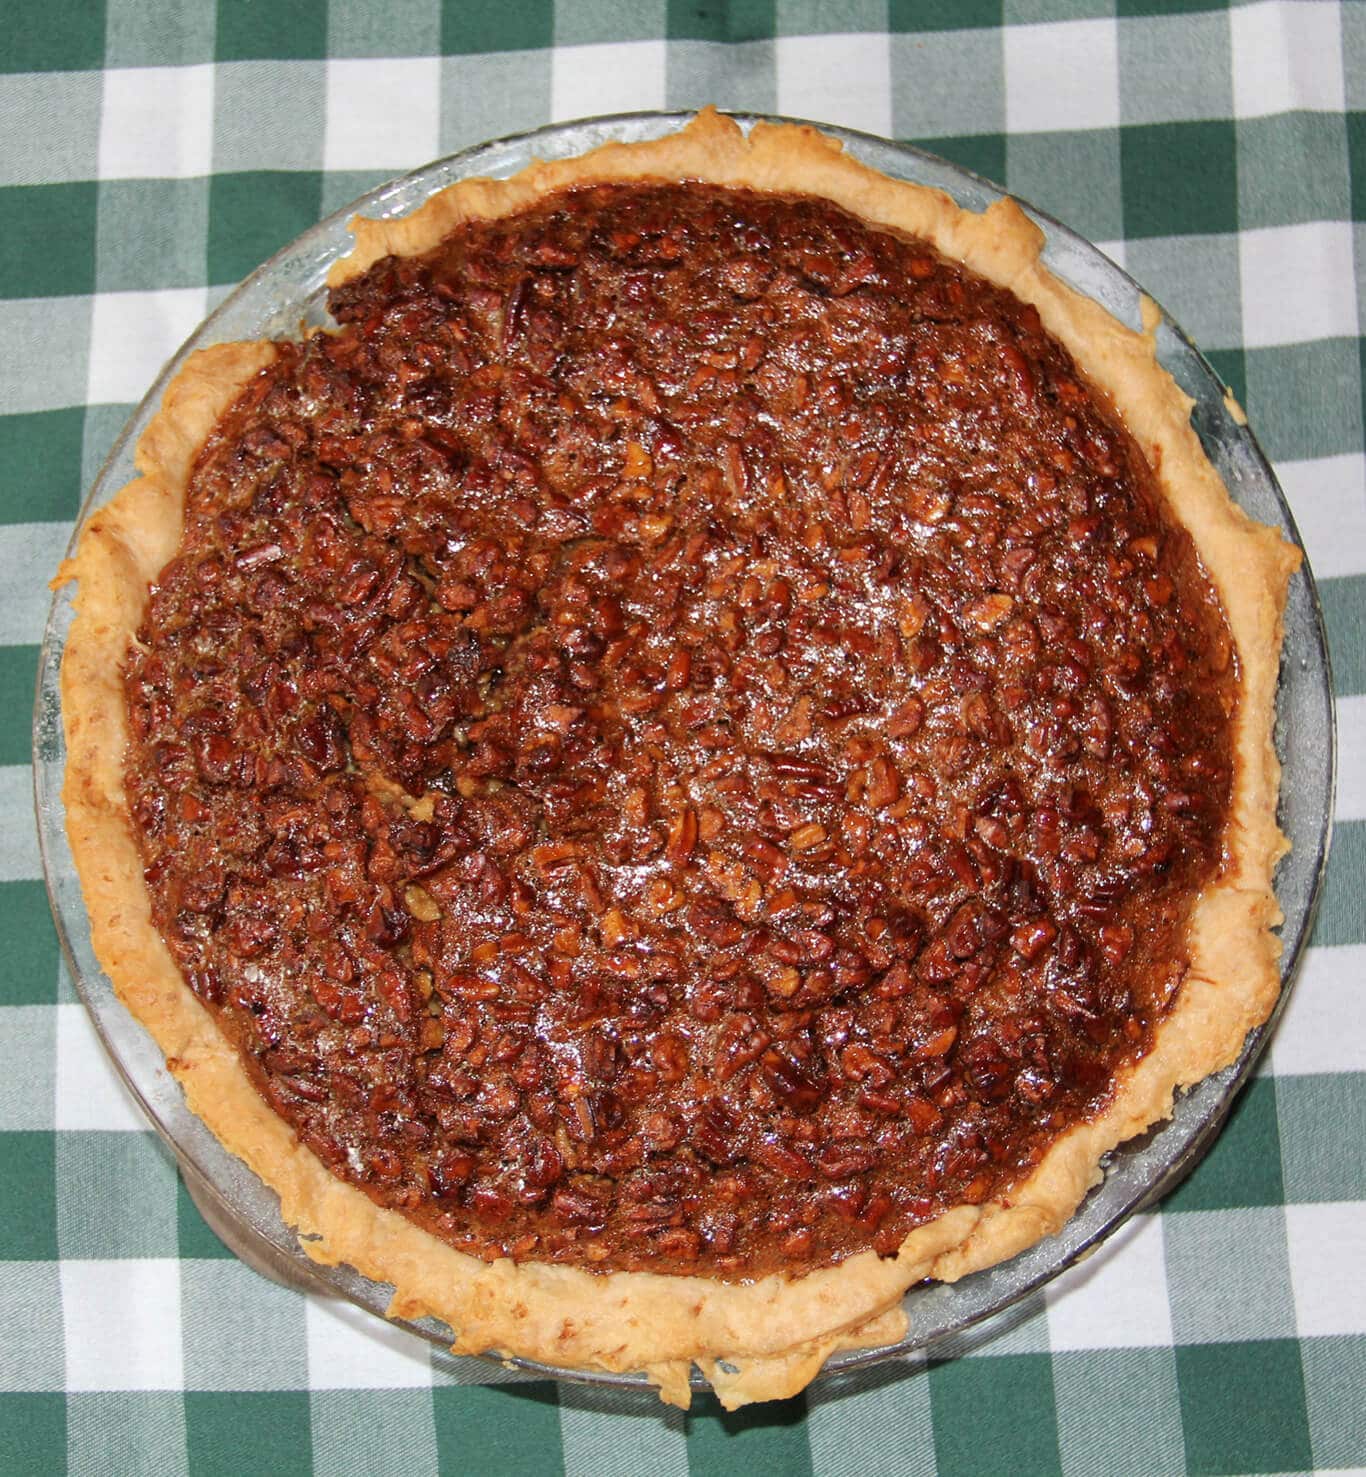 This Southern Pecan Pie recipe is a classic but swaps old-fashioned cane syrup for some of the corn syrup.